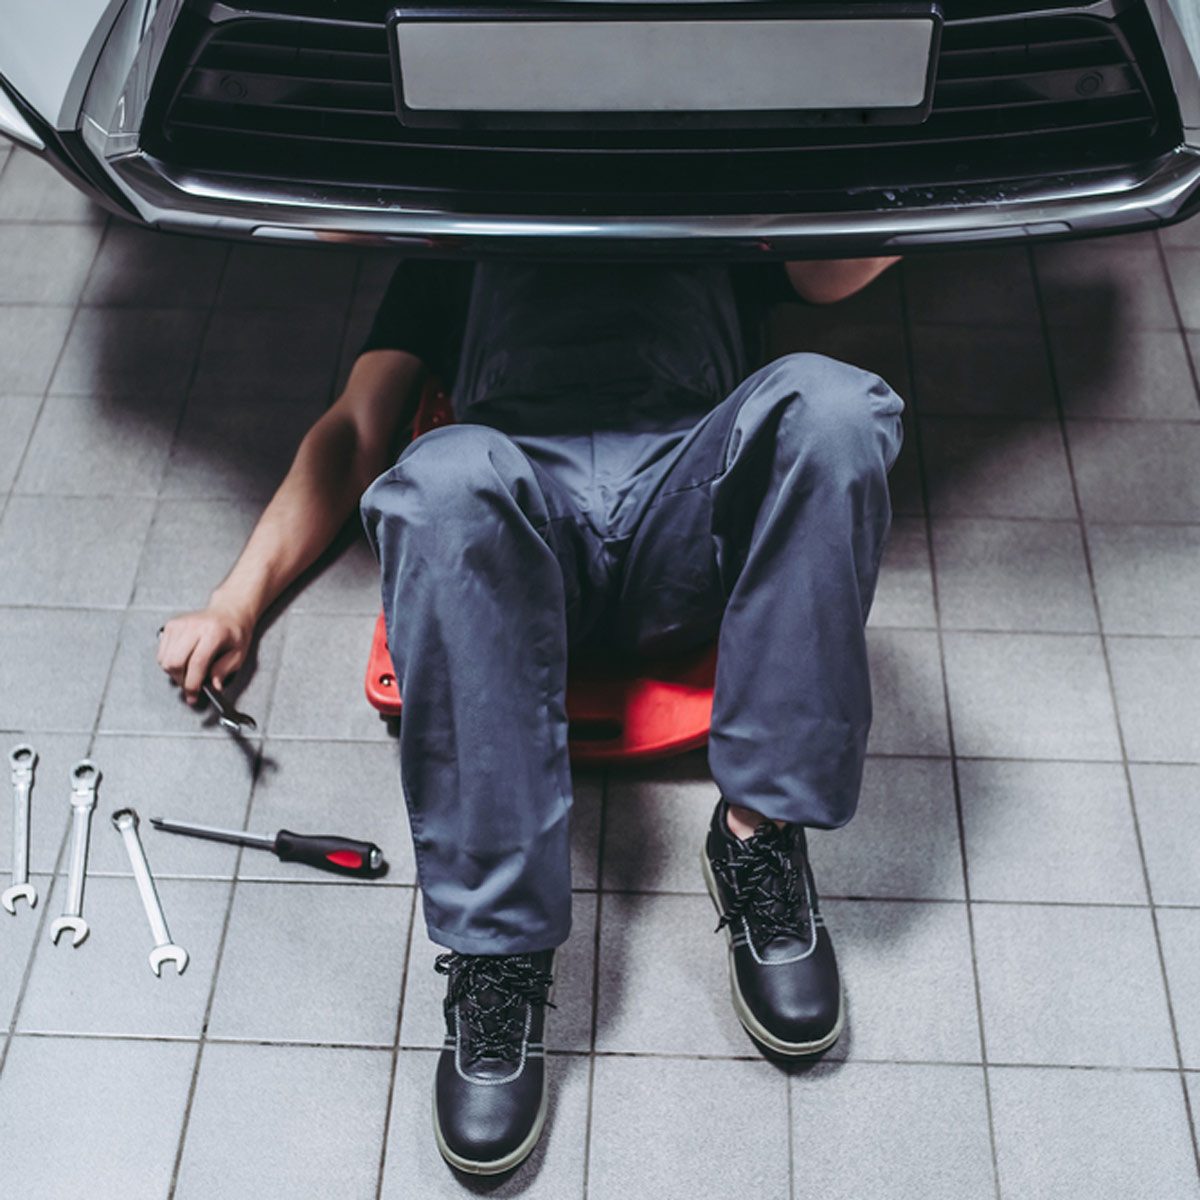 13 Must-Have Tools for DIY Auto Maintenance — Tips From Bob Vila